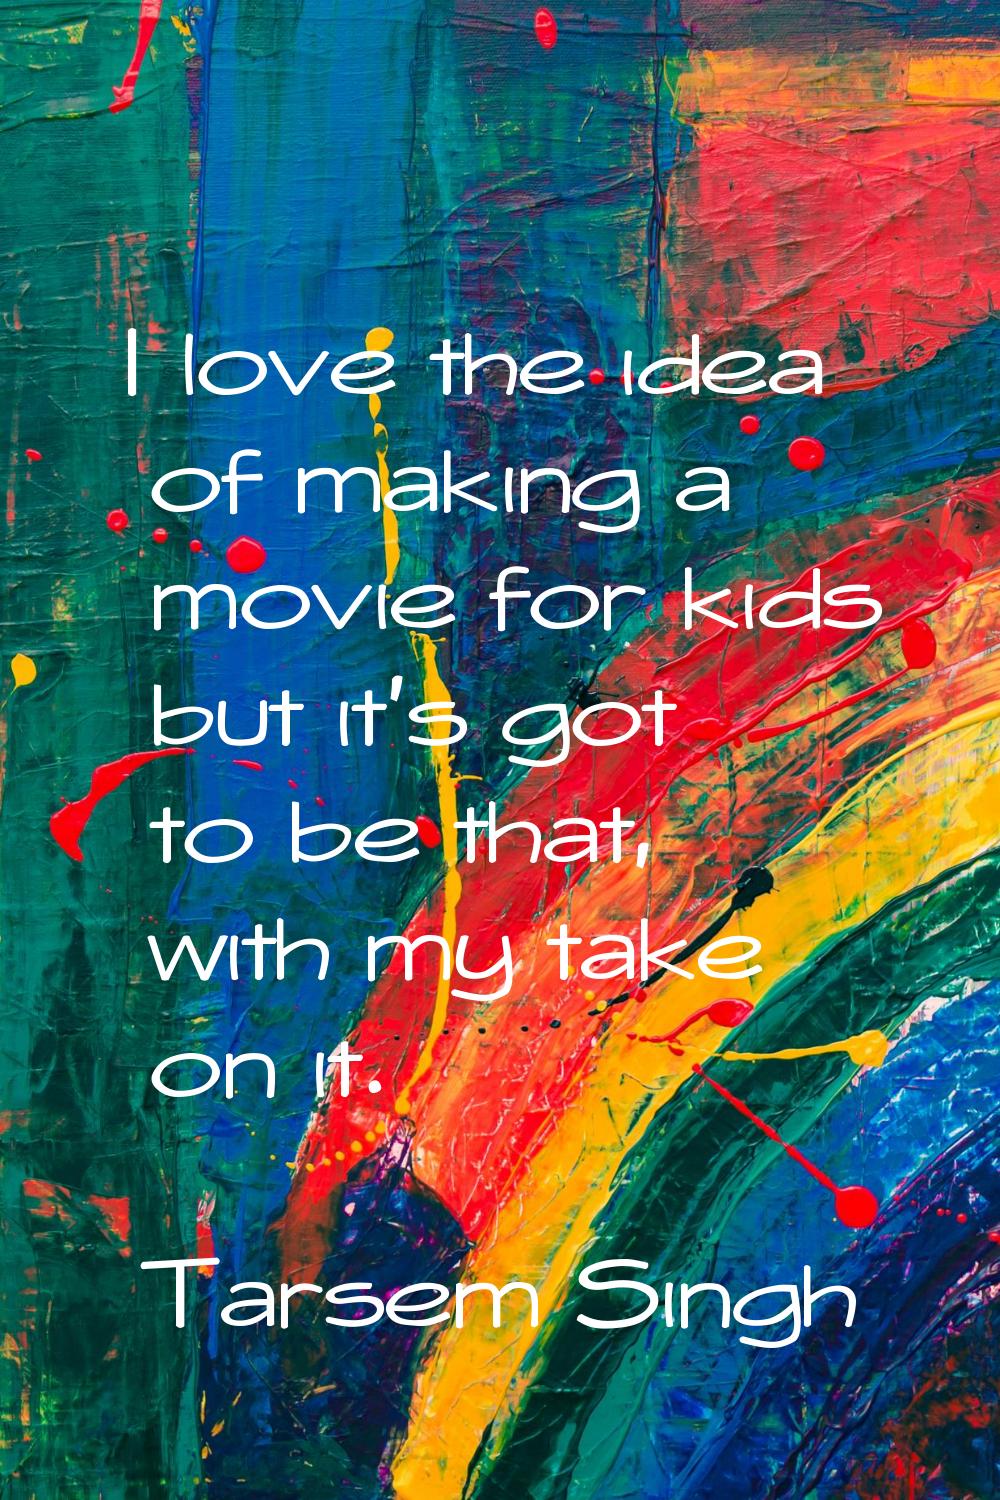 I love the idea of making a movie for kids but it's got to be that, with my take on it.